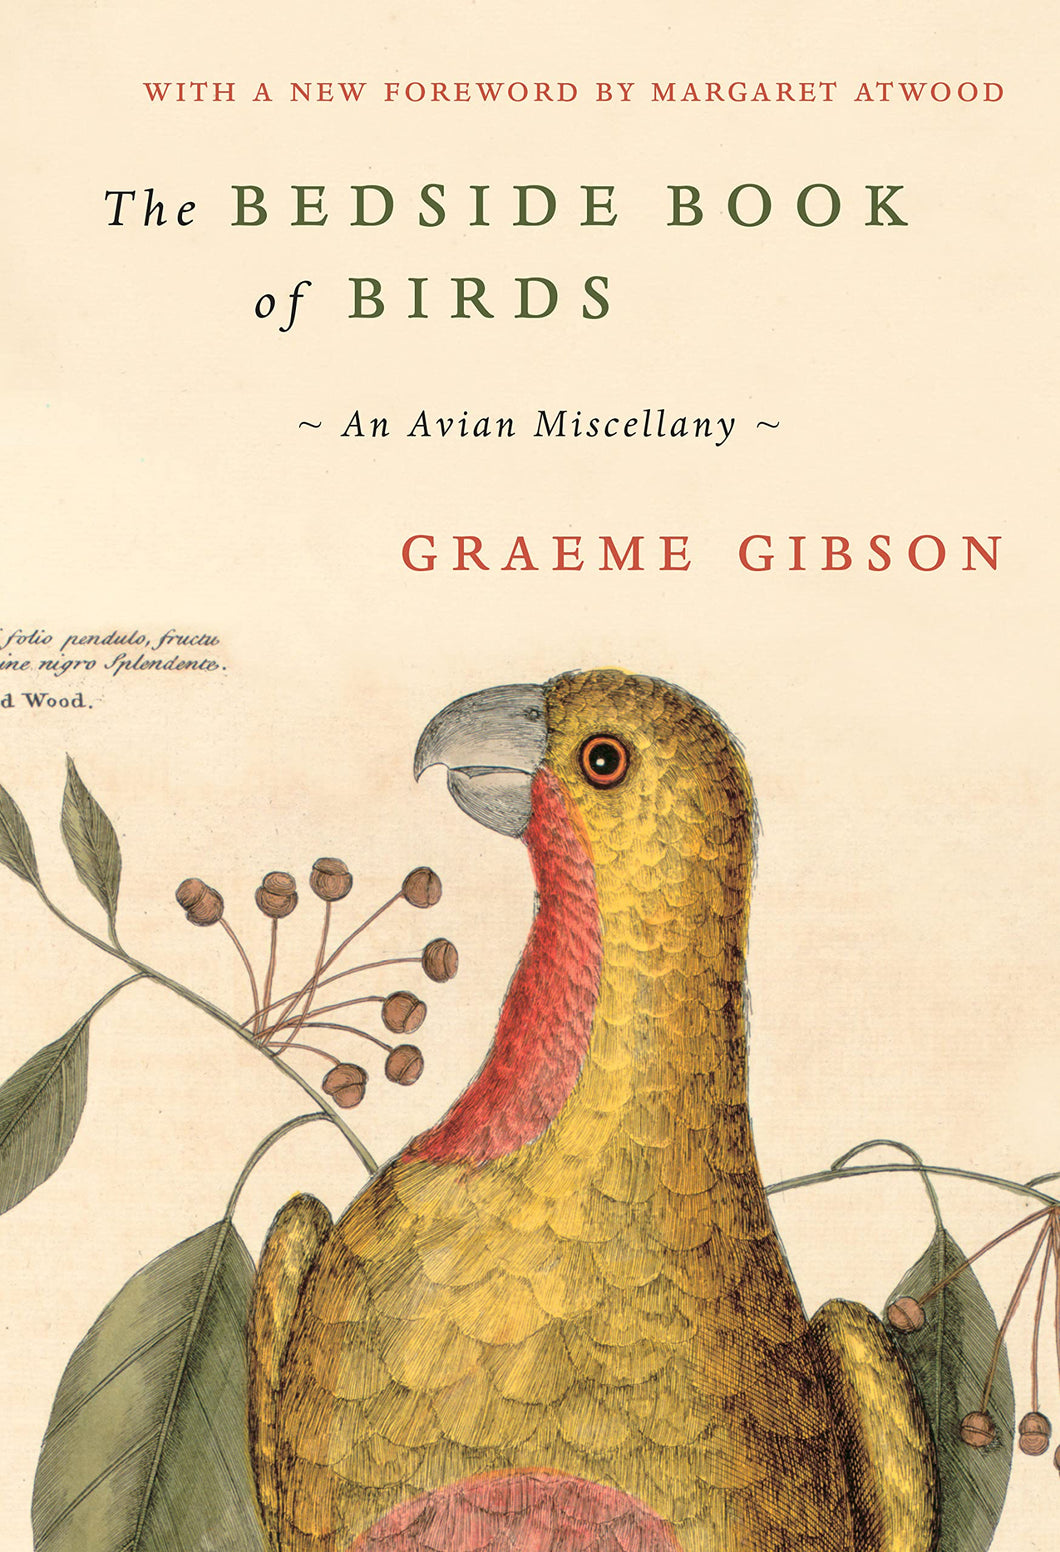 The Bedside Book Of Birds: An Avian Miscellany [Graeme Gibson]